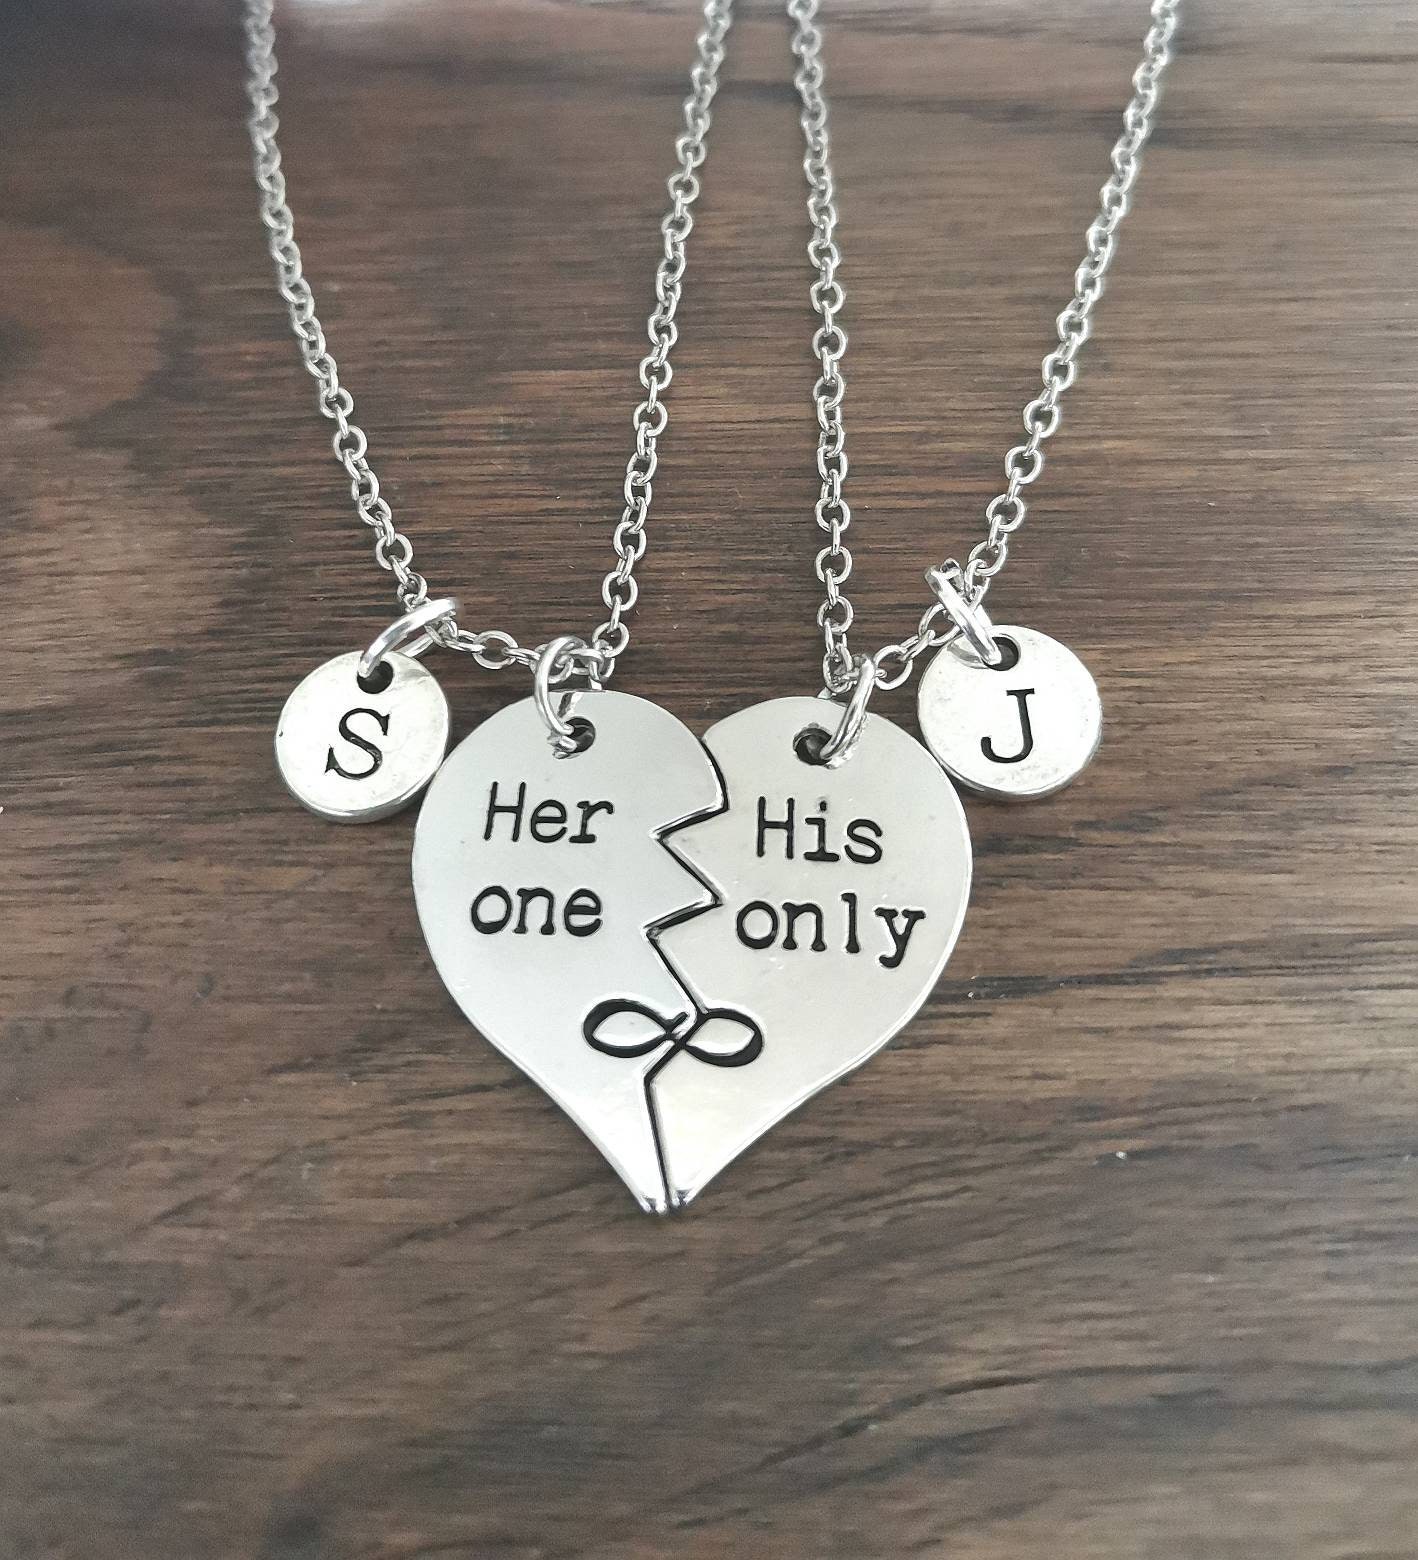 Buy His and Her Necklace, Couples Necklace Set, His Hers Necklaces, Couple  Pendant, Broken Heart Necklace ,boyfriend Girlfriend Gift, Heart Set Online  in India - Etsy